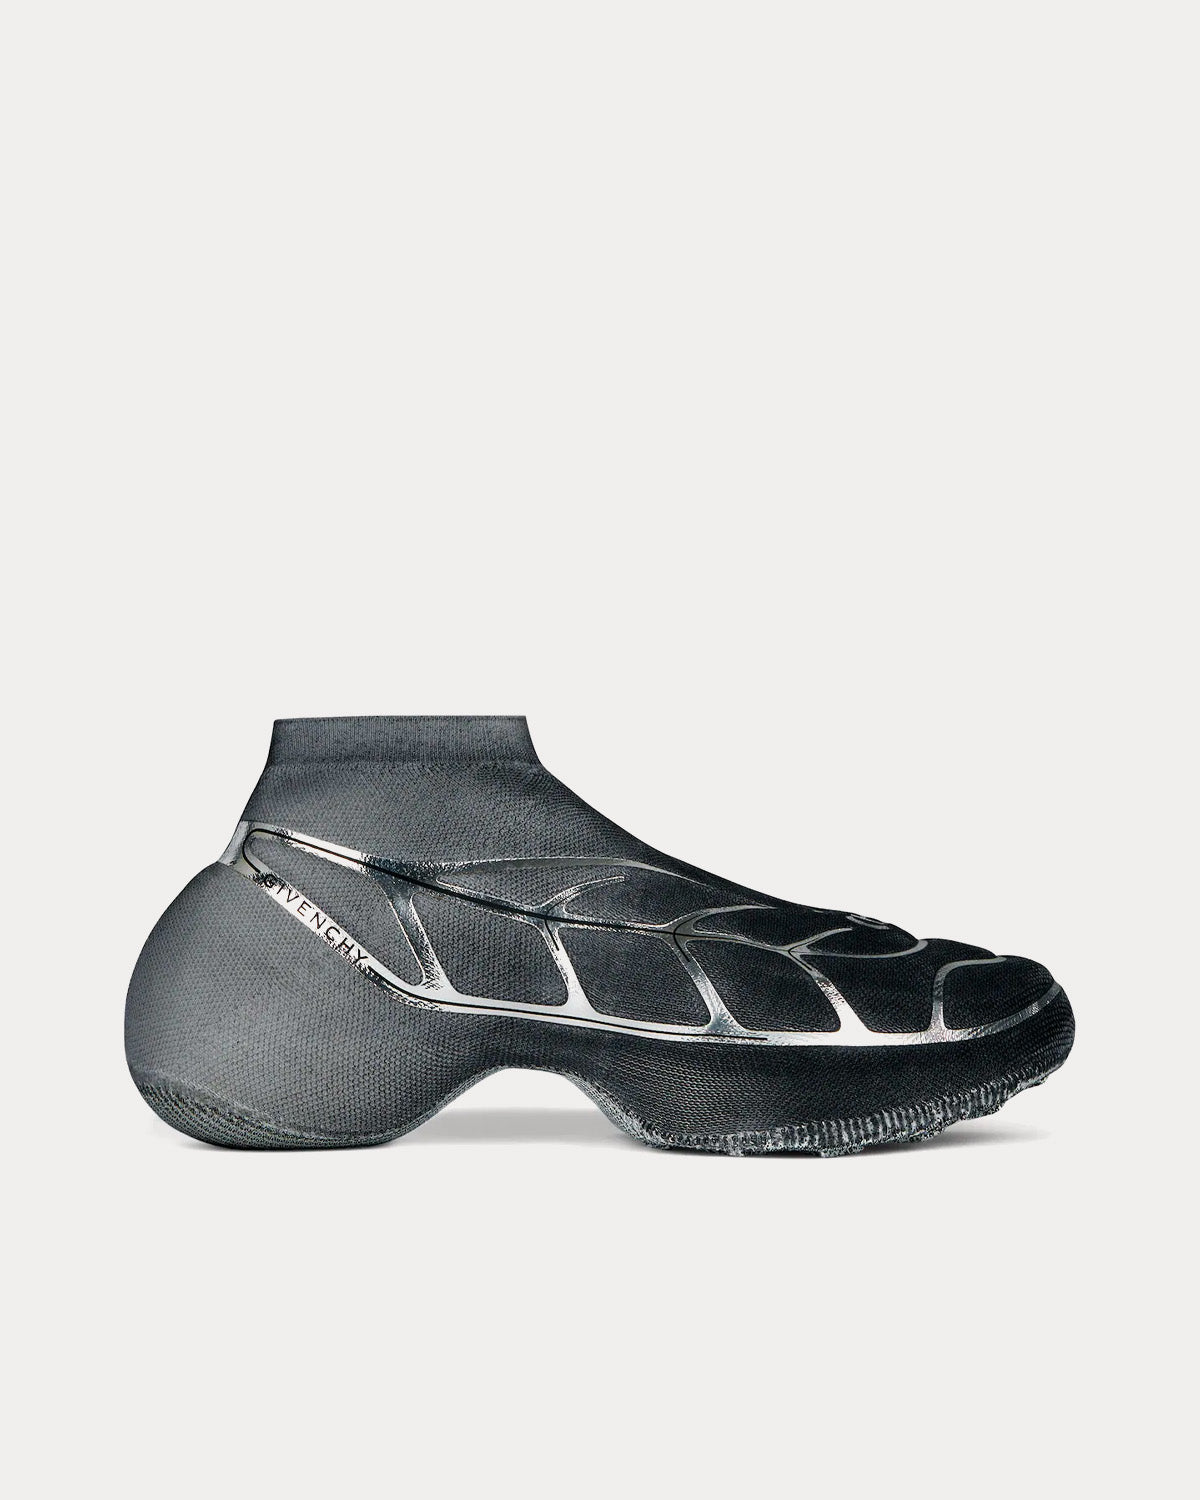 Givenchy x BSTROY - TK-360+ Mid Mesh Black / Silvery Slip On Sneakers